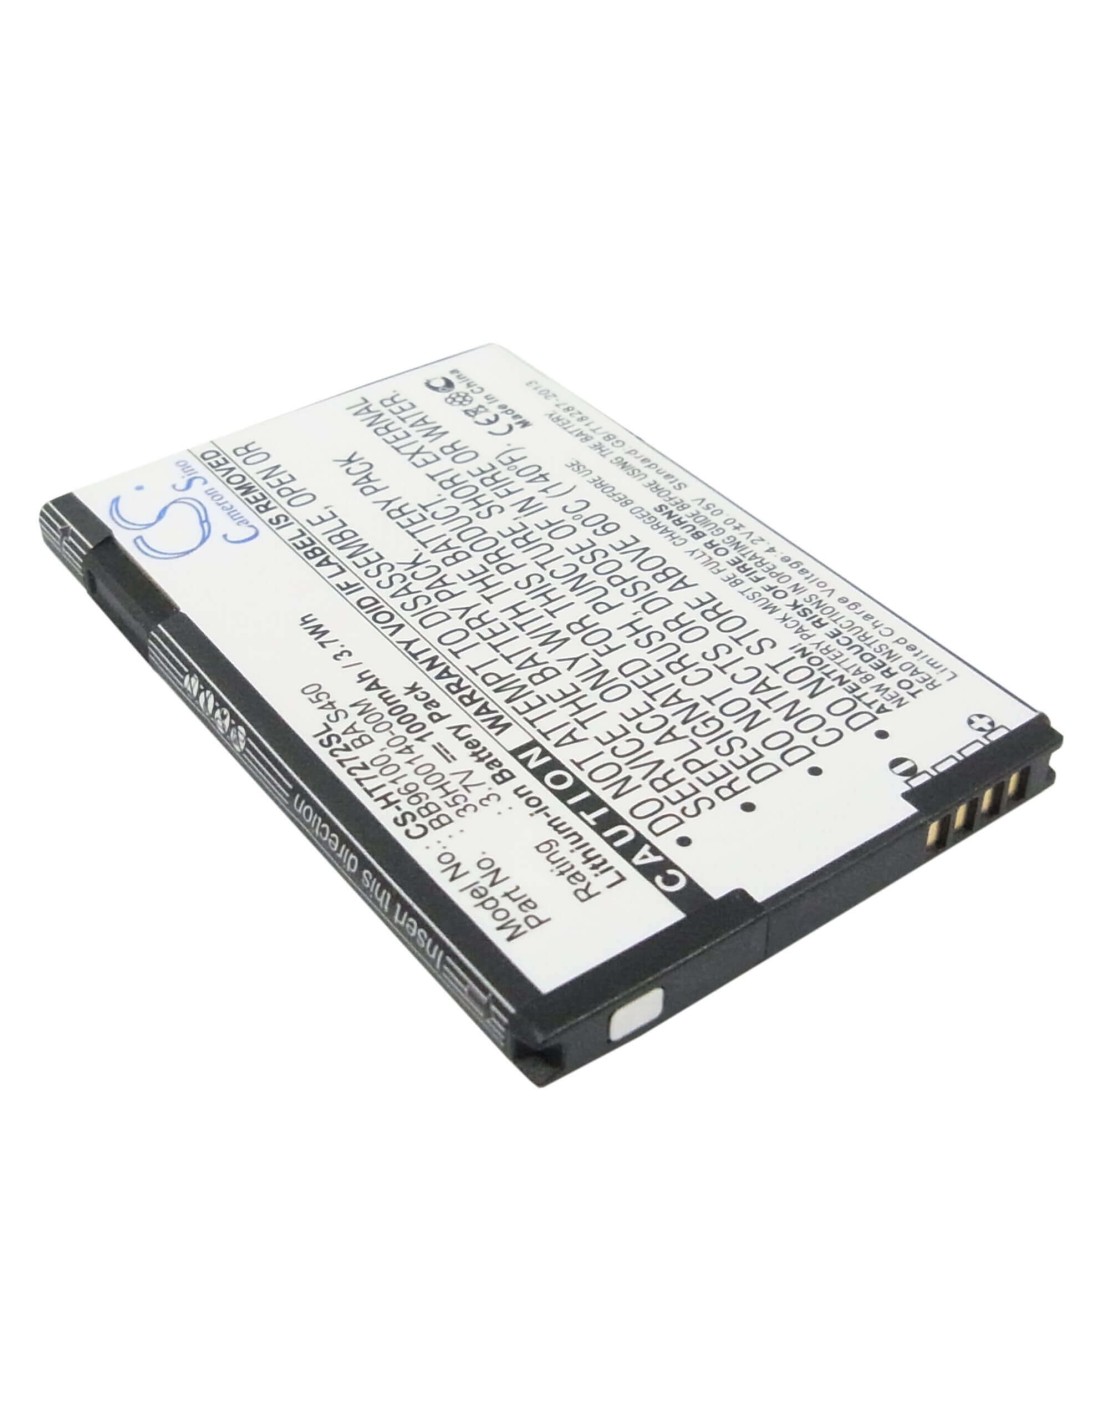 Battery for HTC Desire Z, A7272, Vision 3.7V, 1000mAh - 3.70Wh